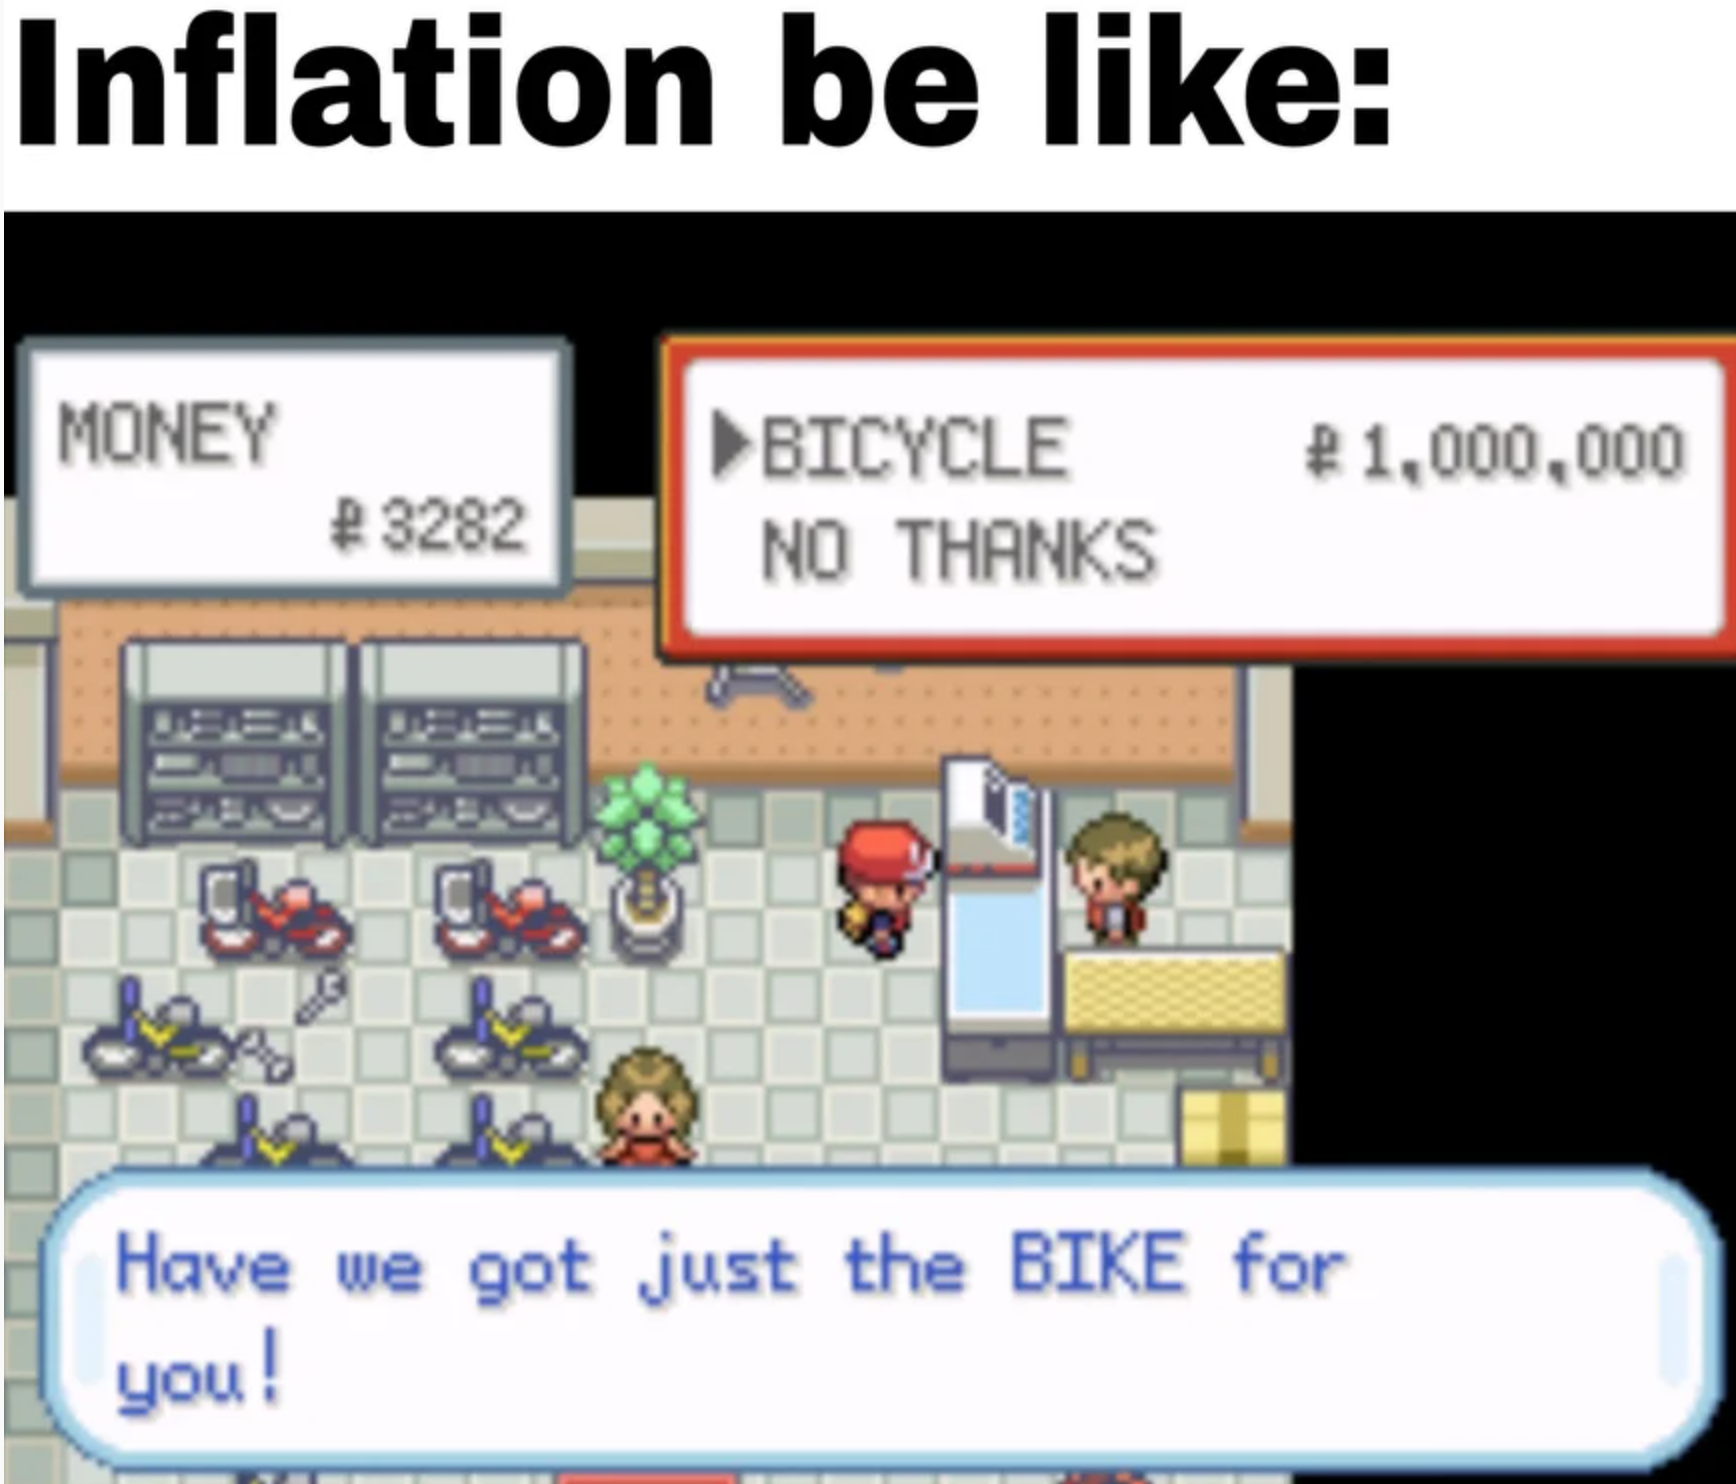 funny gaming memes - pokemon memes bicycle - Inflation be Money Bicycle No Thanks ,000,000 Have we got just the Bike for you!